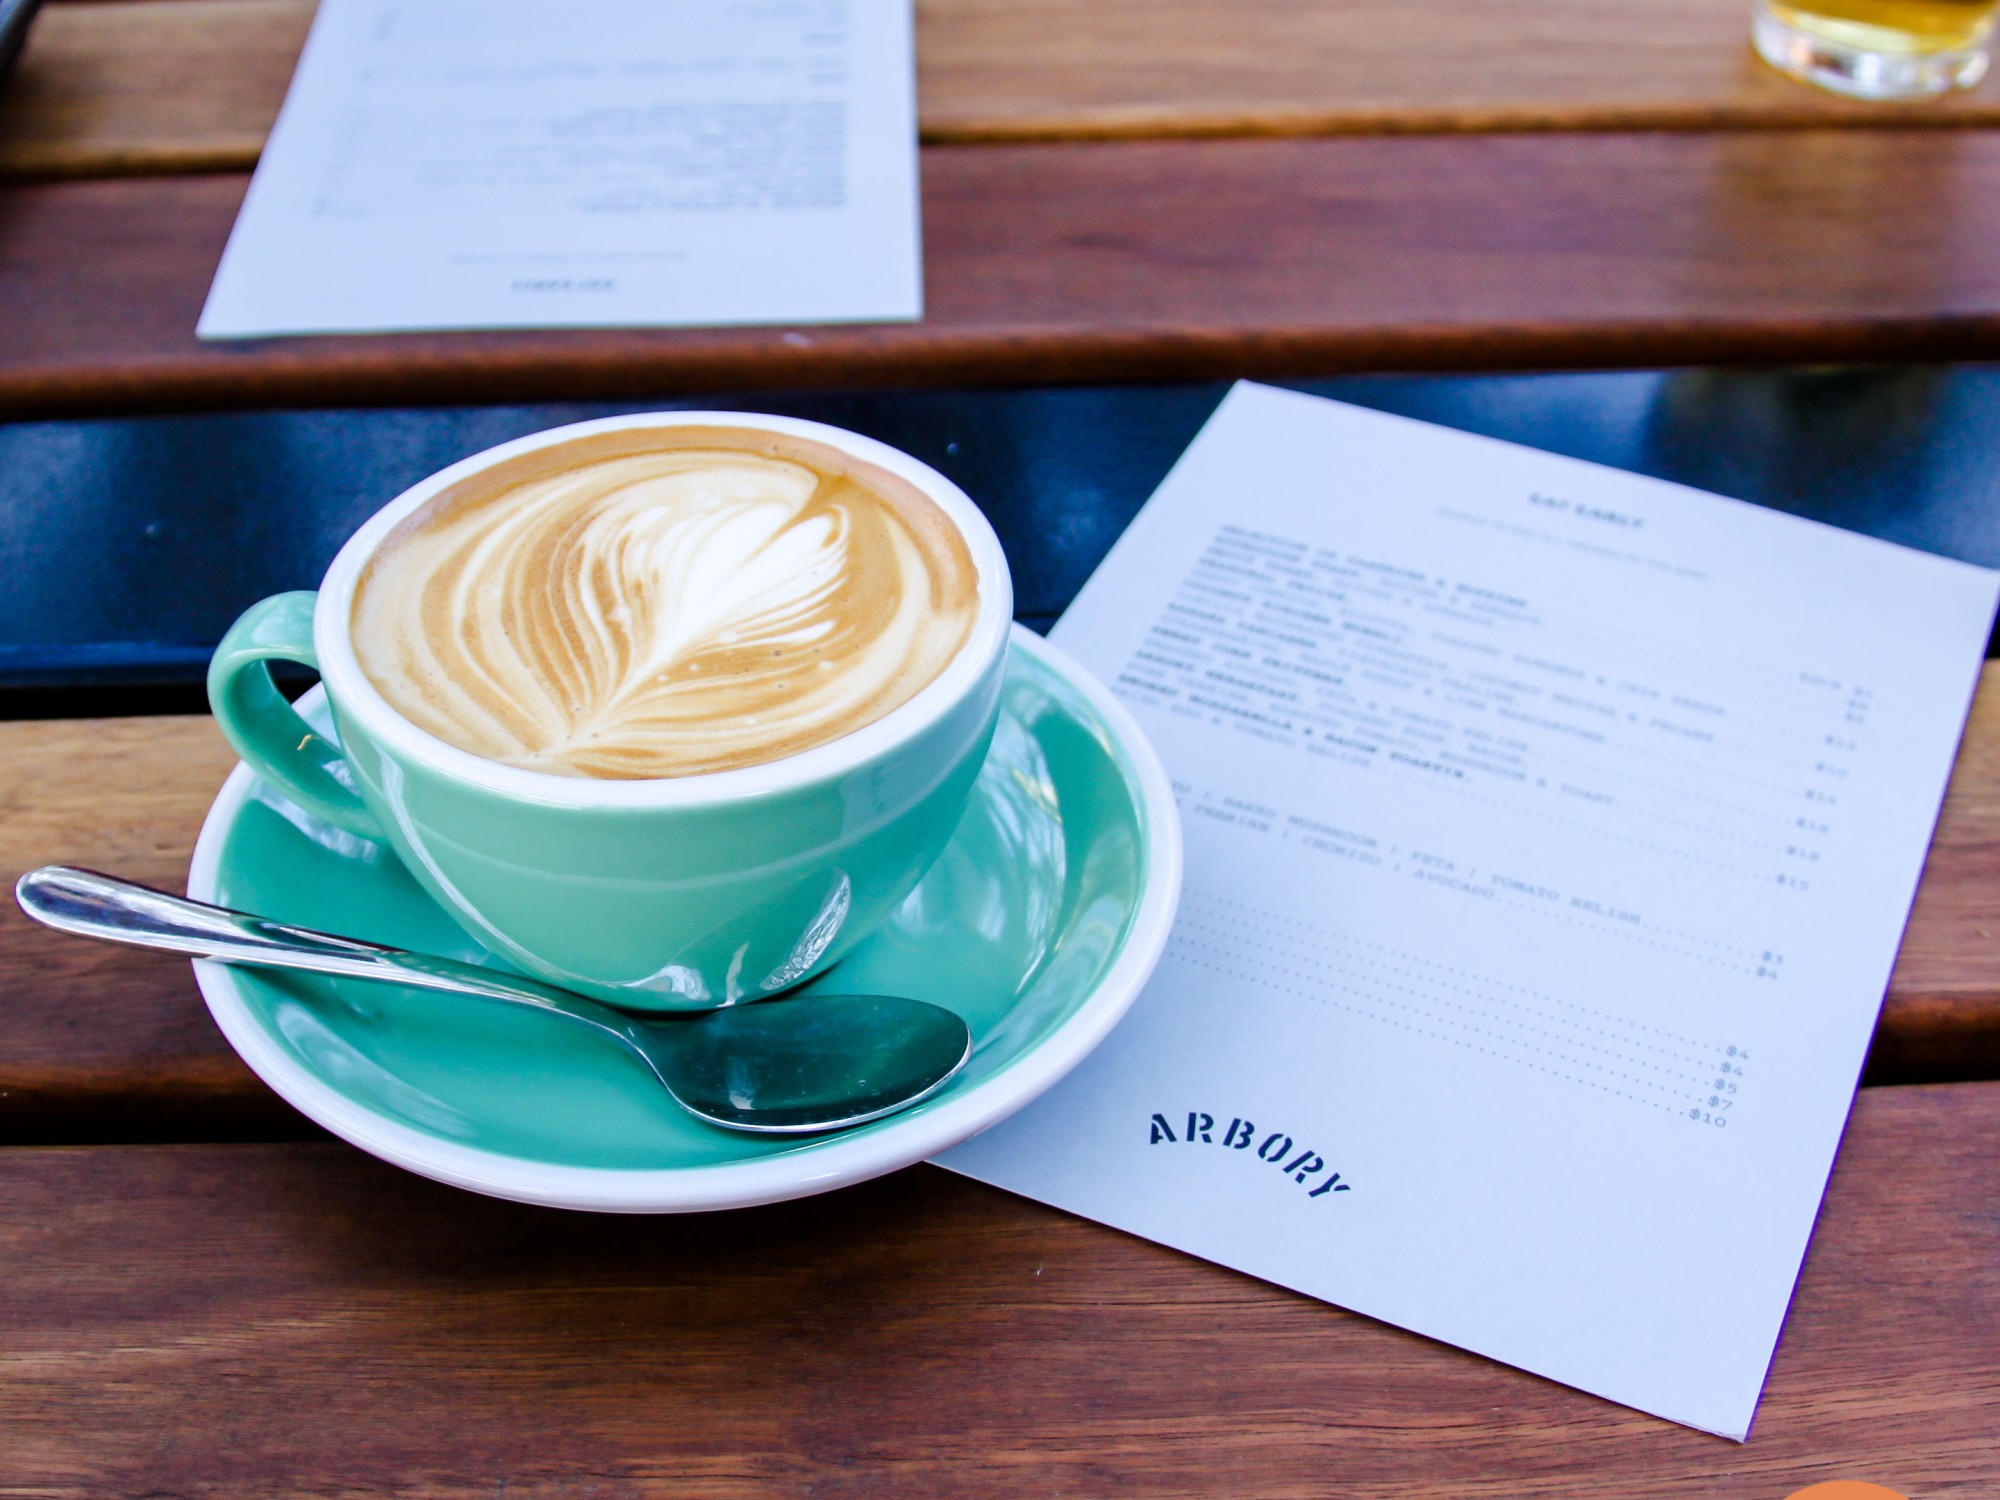 Arbory Eatery Melbourne Stay Awhile Flat White